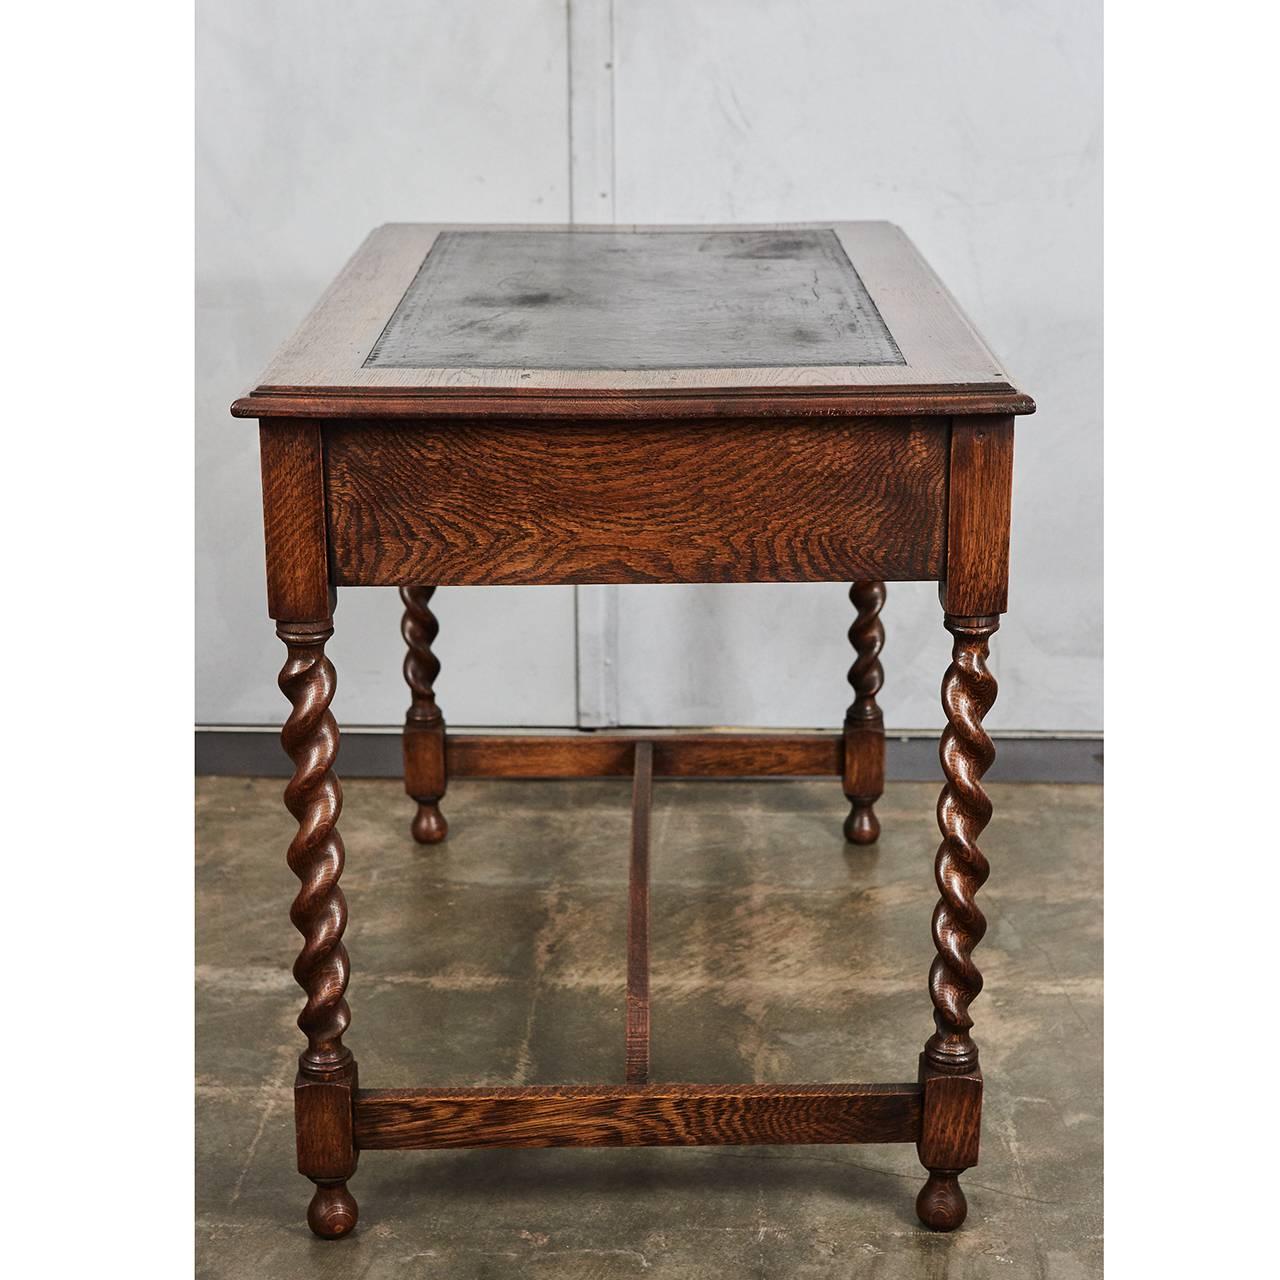 20th Century English Oak Writing Table or Desk with Leather Top